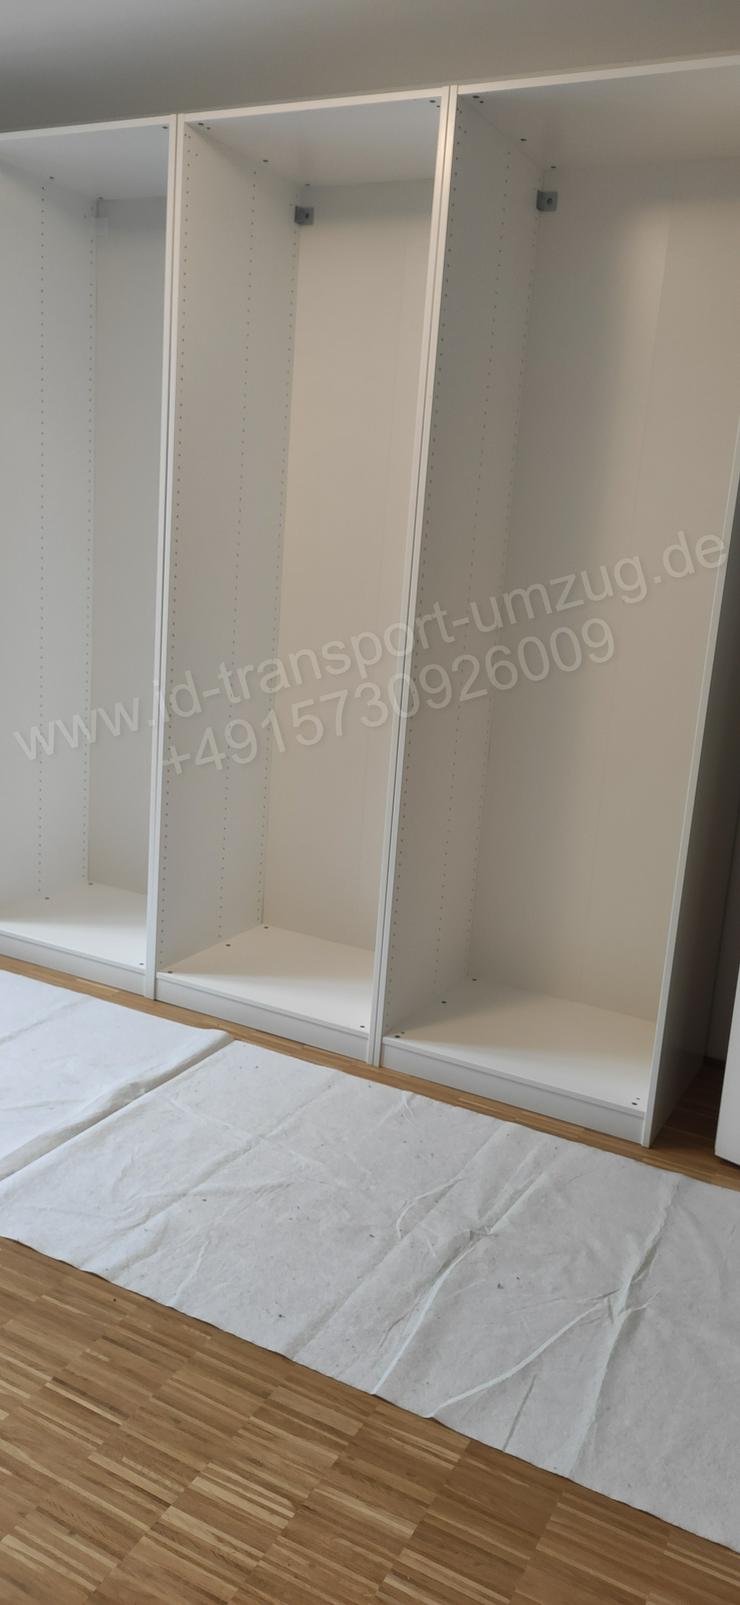 Bild 9: I.D Technical Services in and around Frankfurt am Main, New Furniture Assembly Service, Handyman Services